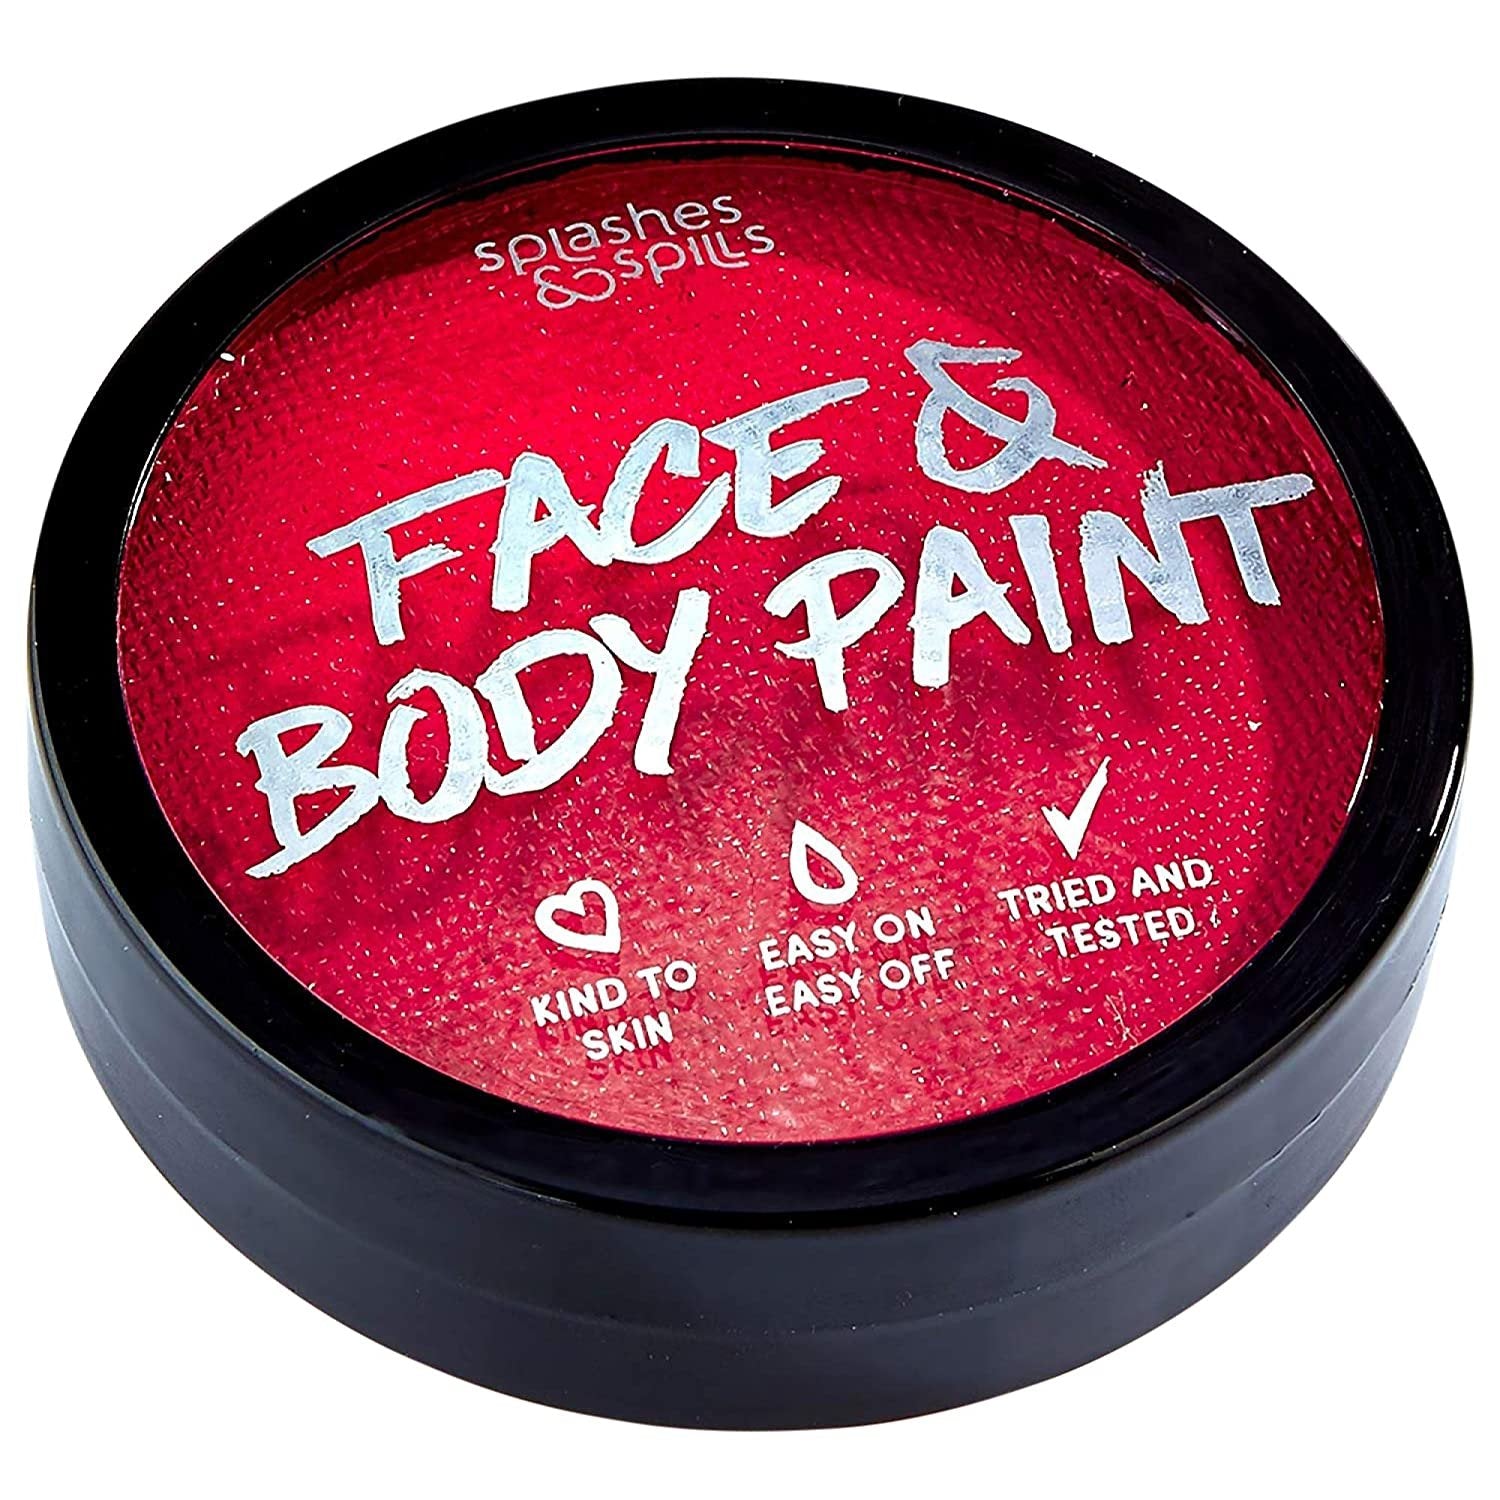 Water Activated Face and Body Paint - Red, 18g Cake Tub - Pretend Costume and Dress Up Makeup by Splashes & Spills